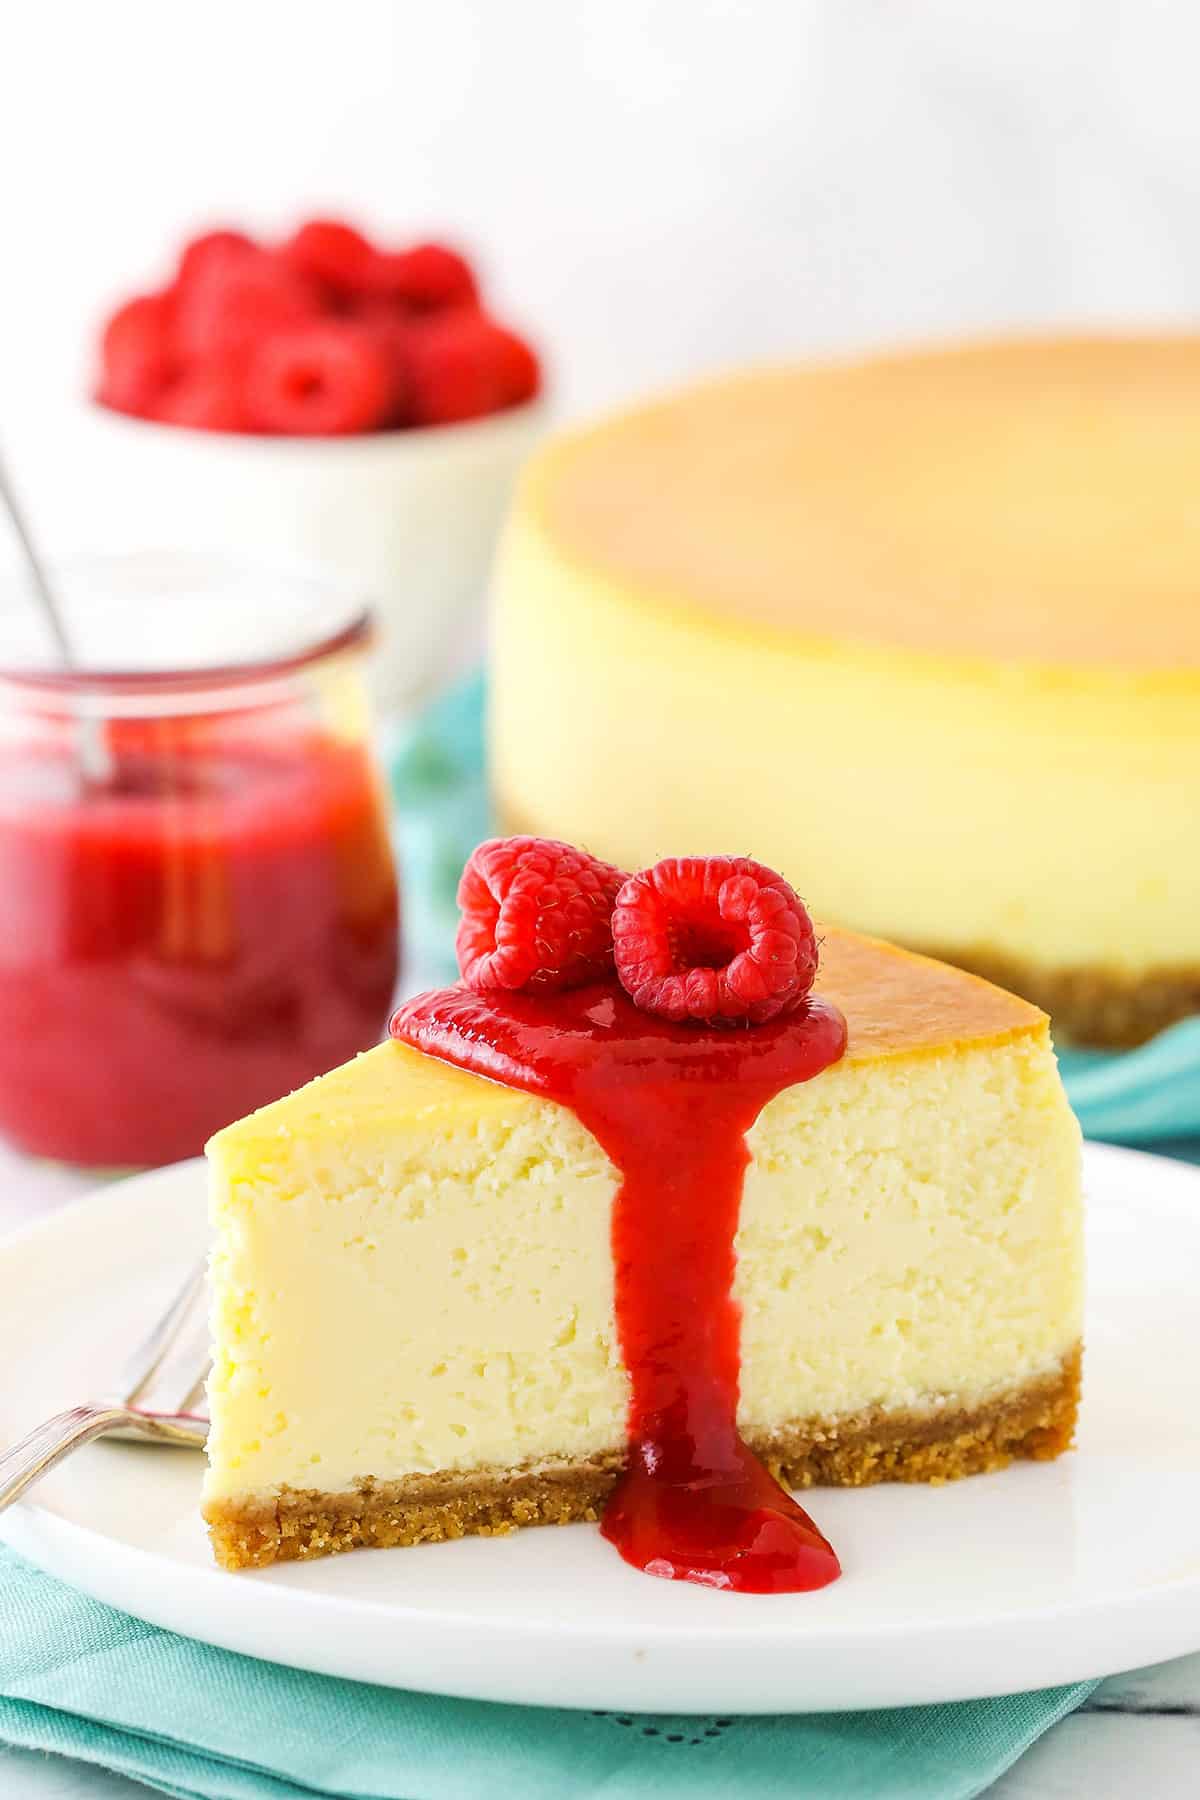 Slice of New York Style Cheesecake topped with raspberry sauce and raspberries on a white plate with a fork